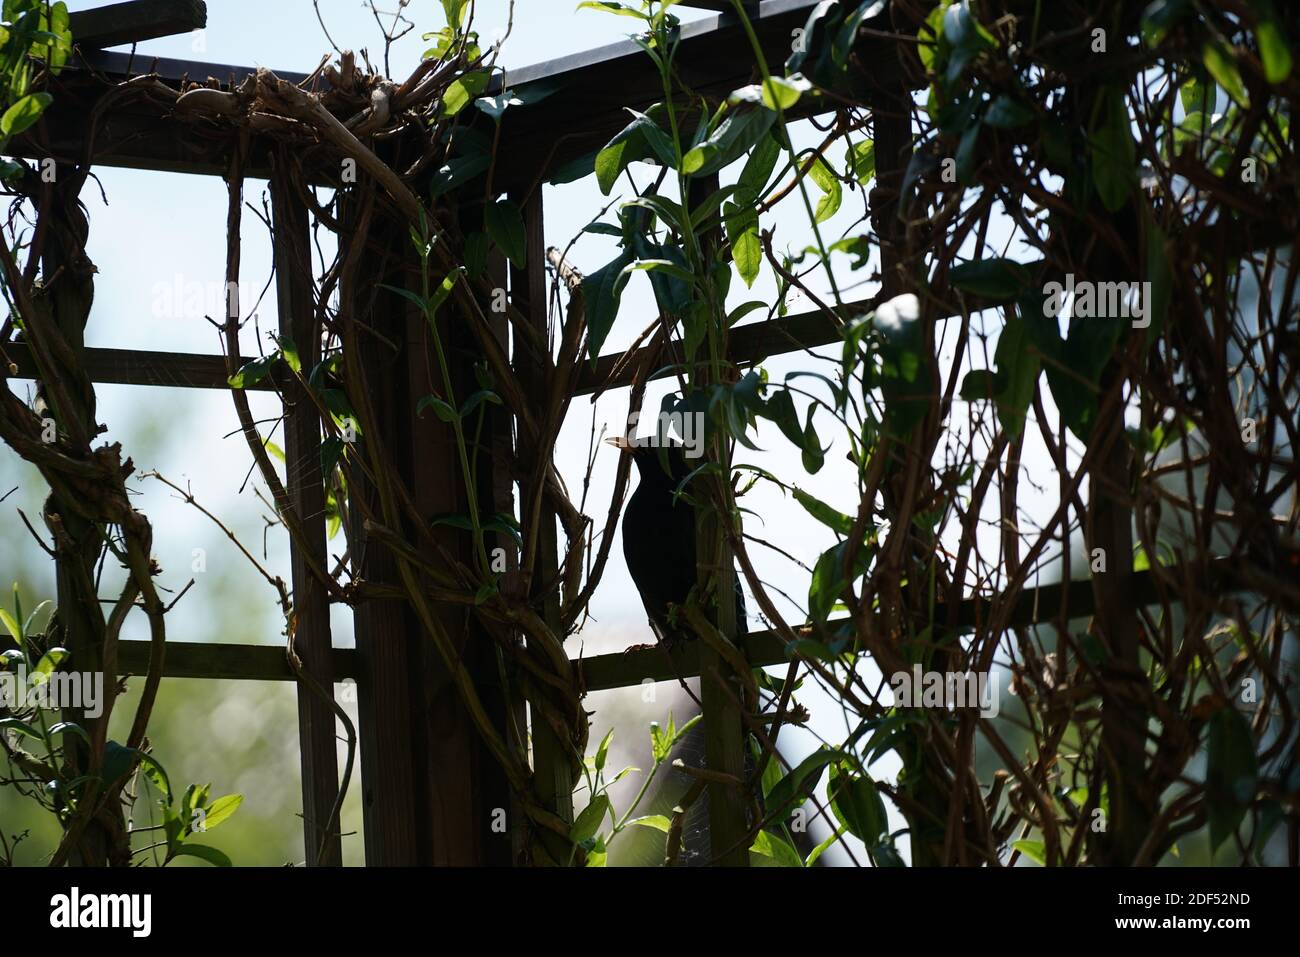 A closeup of a bird perched on the trellis made of wood Stock Photo